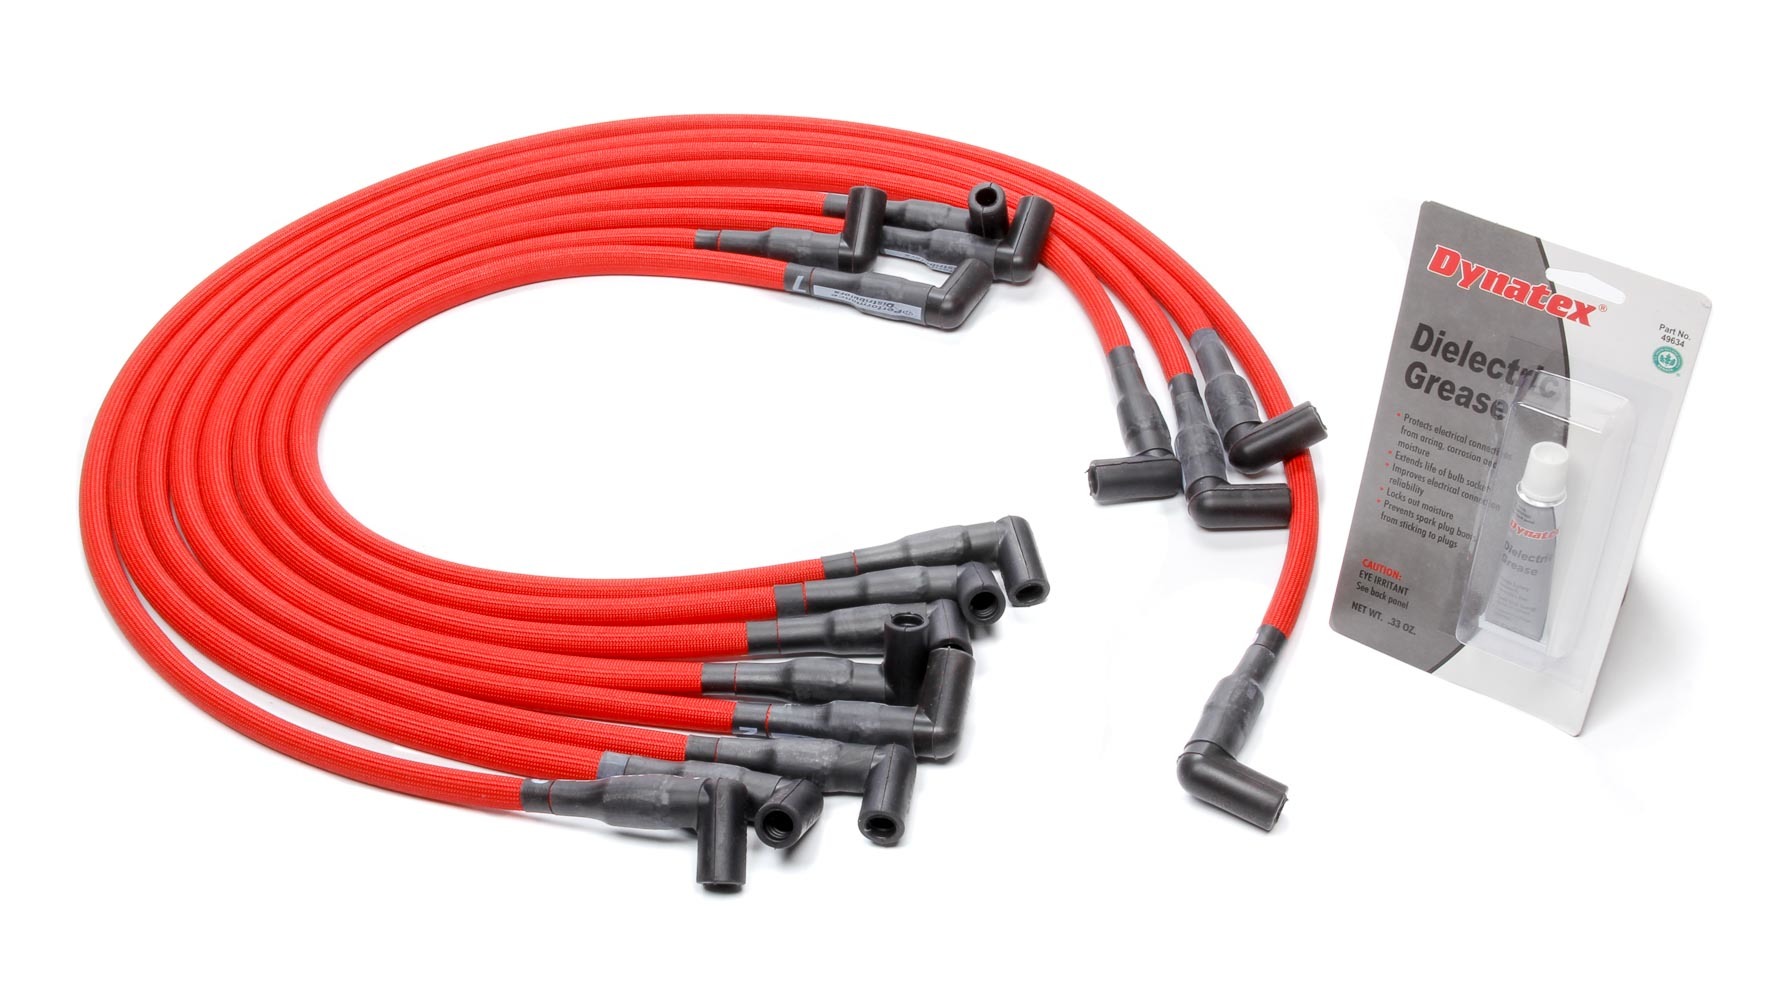 Performance Distributors C9052RD Spark Plug Wire Set, Livewires, Spiral Core, 10 mm, Red, 90 Degree Plug Boots, HEI Style Terminal, GM V8, Kit